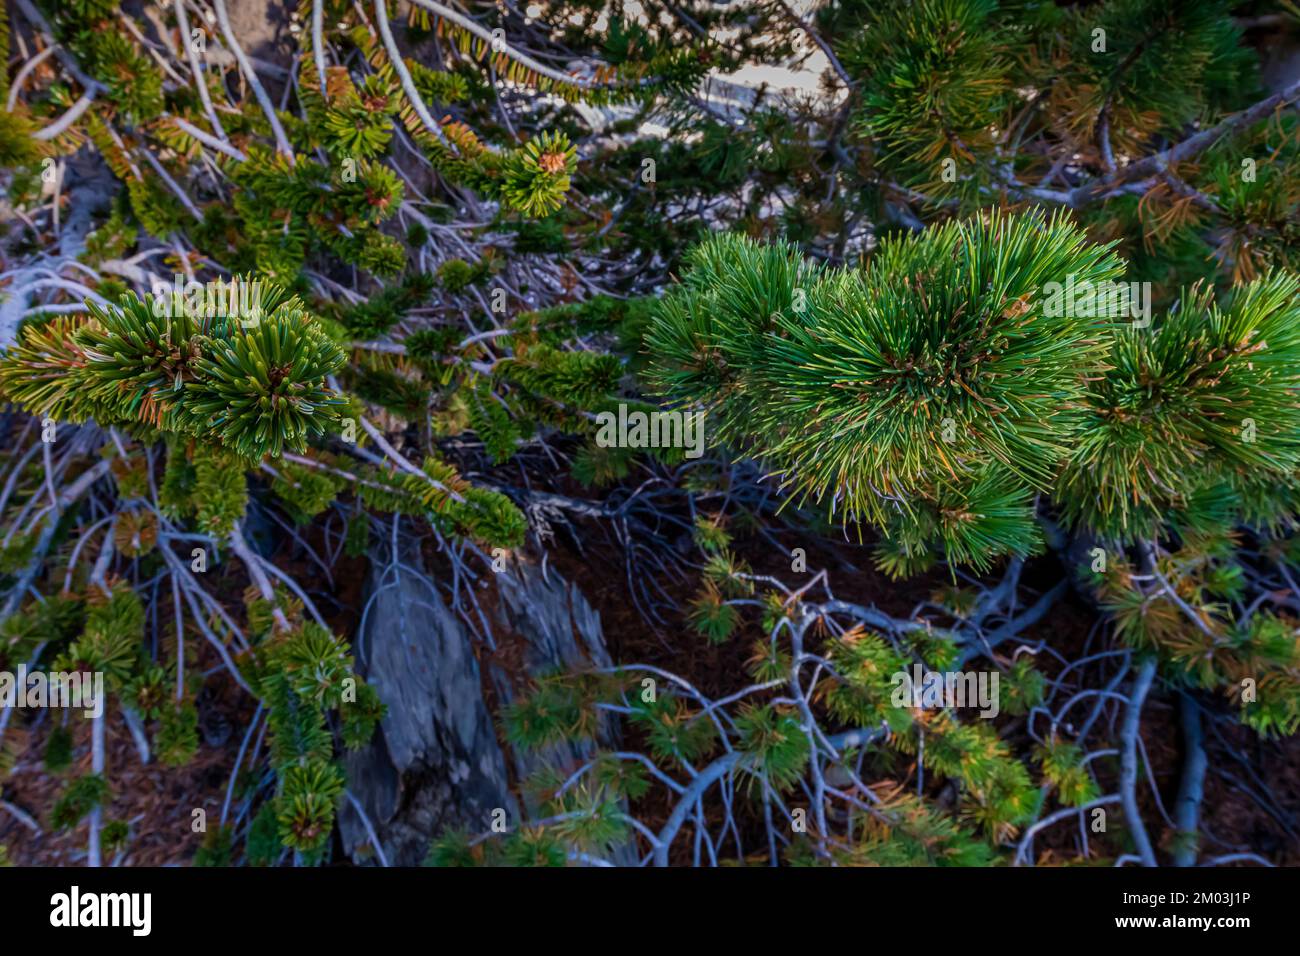 Comparison of Bristlecone Pine (L) and Limber Pine (R) needles, Ancient Bristlecone Pine Forest, Inyo National Forest, California, USA Stock Photo